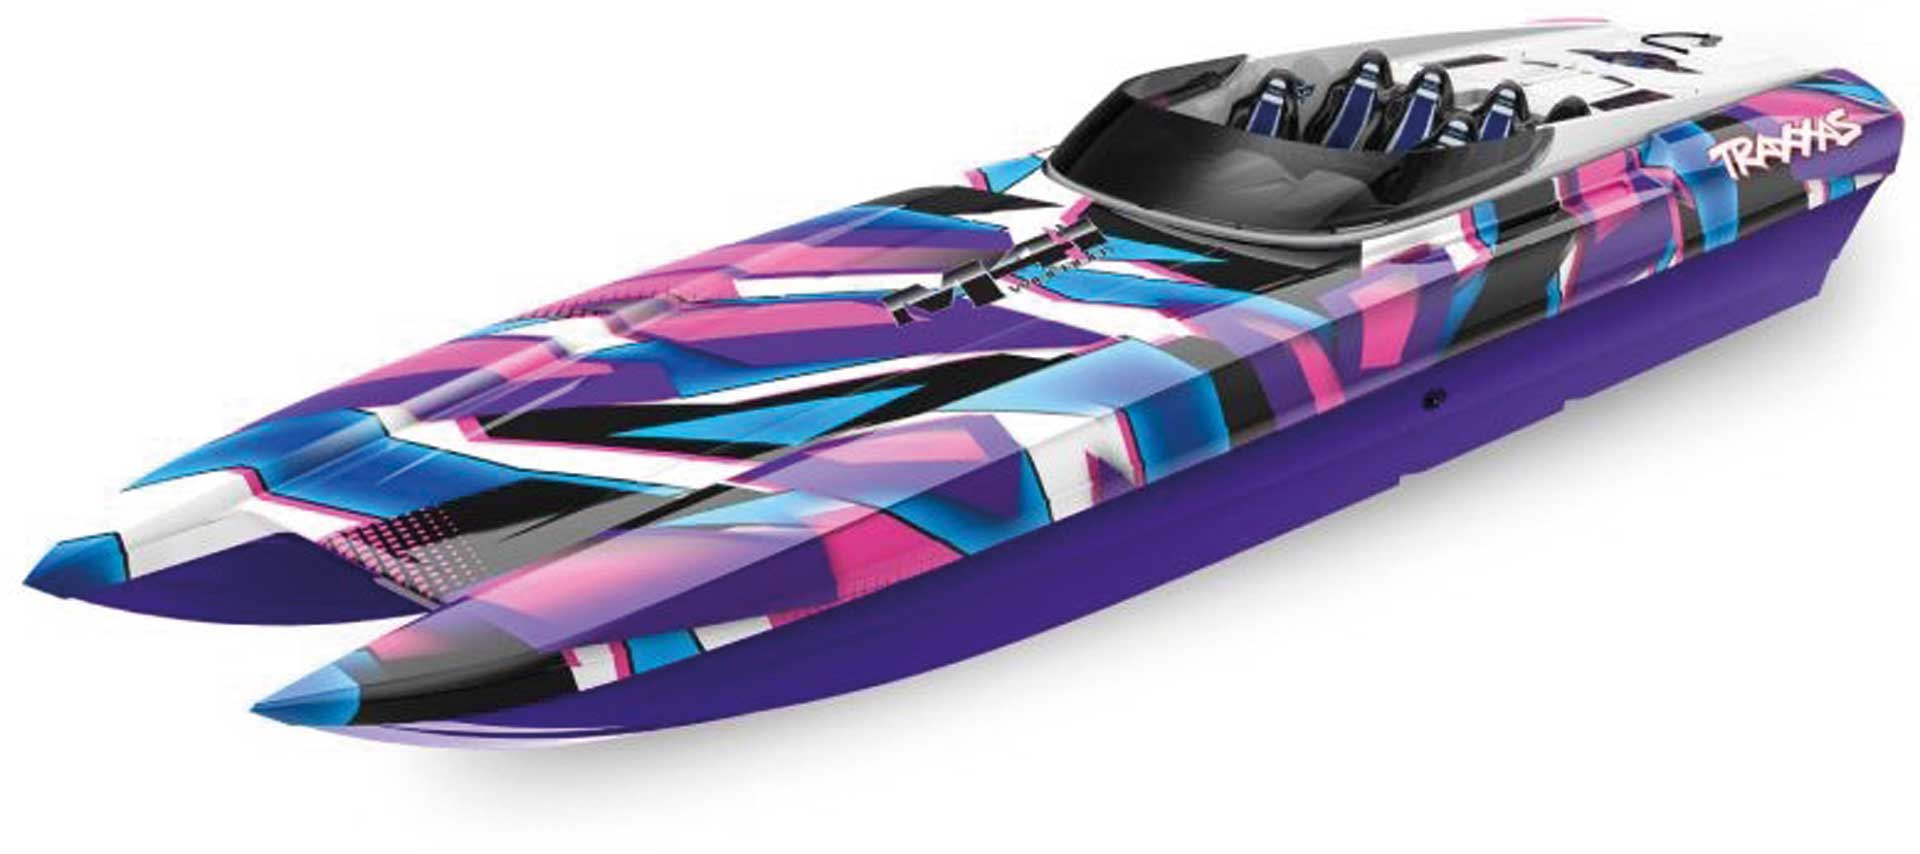 TRAXXAS DCB M41 PURBLE 40INCH WITHOUT BATTERY/CHARGER BL-CATAMARAN-RACING-BOAT BRUSHLESS